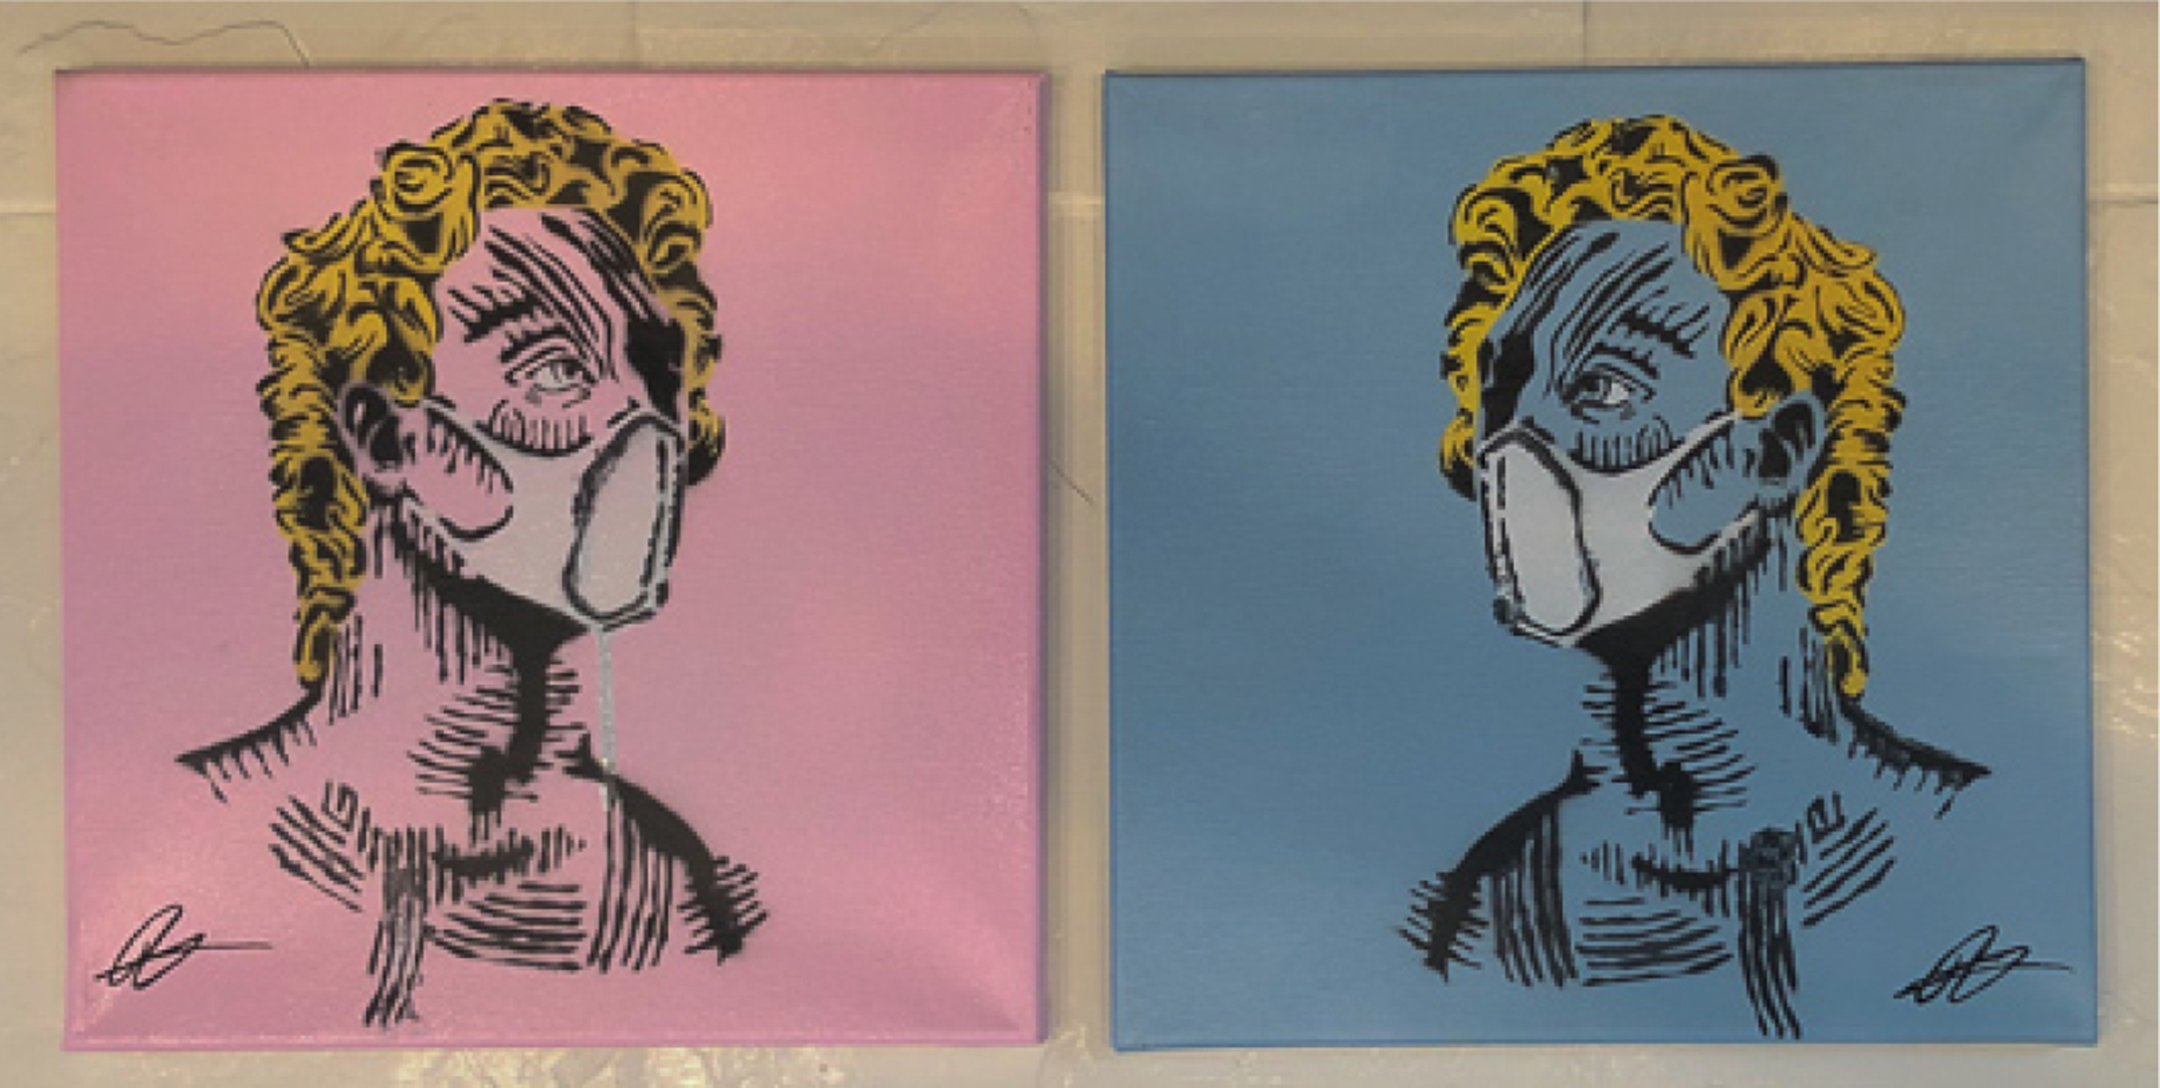 Two illustrations of a blonde man, from the shoulders up, wearing a mask, one on a pink background and one on a blue background